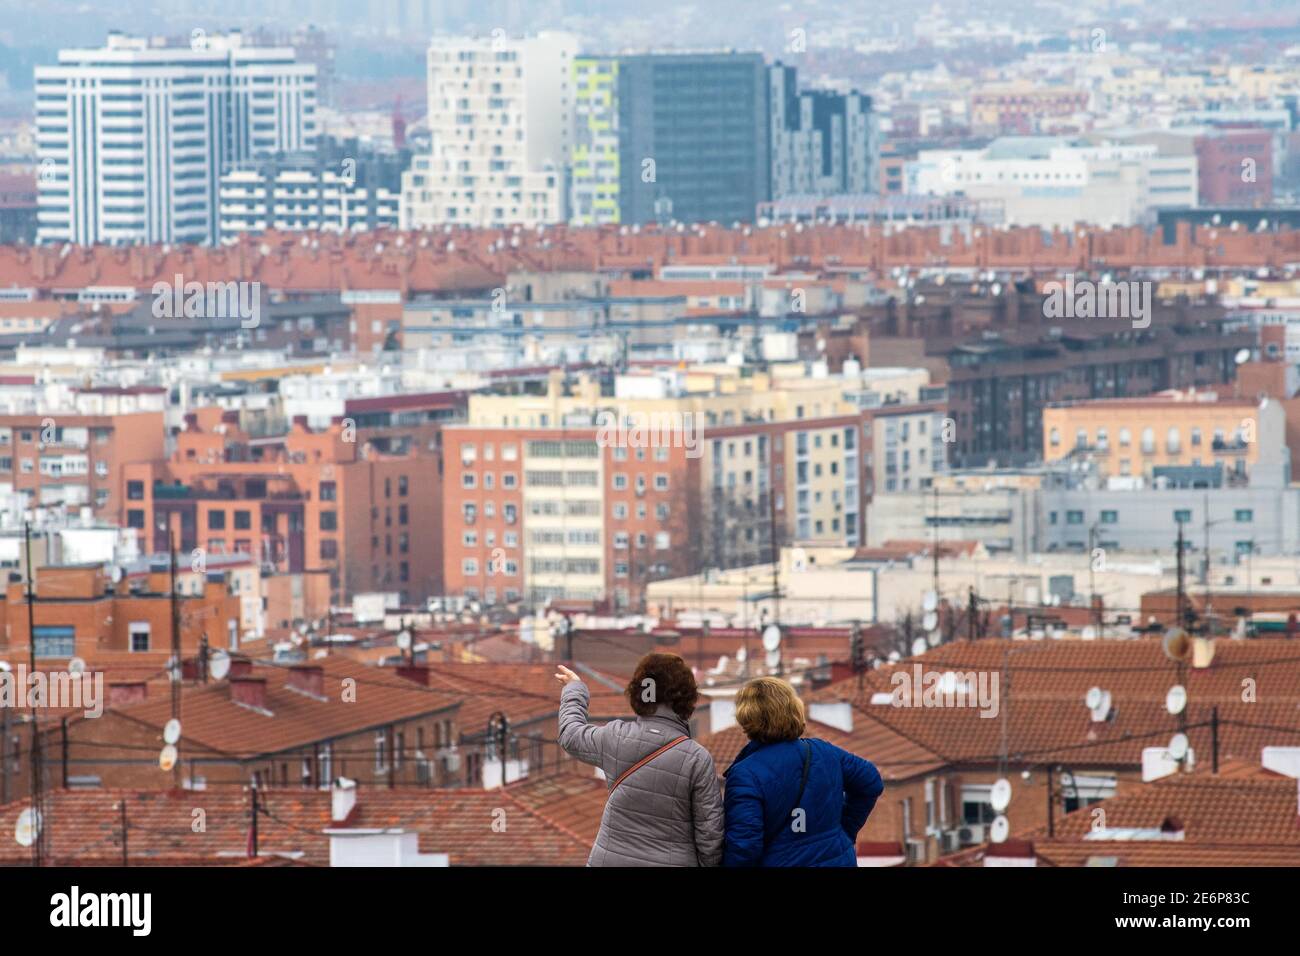 Madrid, Spain. 29th Jan, 2021. A couple of women look at a residential area in Madrid. One out of three households in the city of Madrid have been impoverished over 2020 due to the coronavirus (COVID-19) crisis, according to a report on the impact of the pandemic on the well-being of the families of Madrid presented today by the vice mayor, Begoña Villacis, with the delegate of Families, Equality and Social Welfare, Pepe Aniorte. Credit: Marcos del Mazo/Alamy Live News Stock Photo